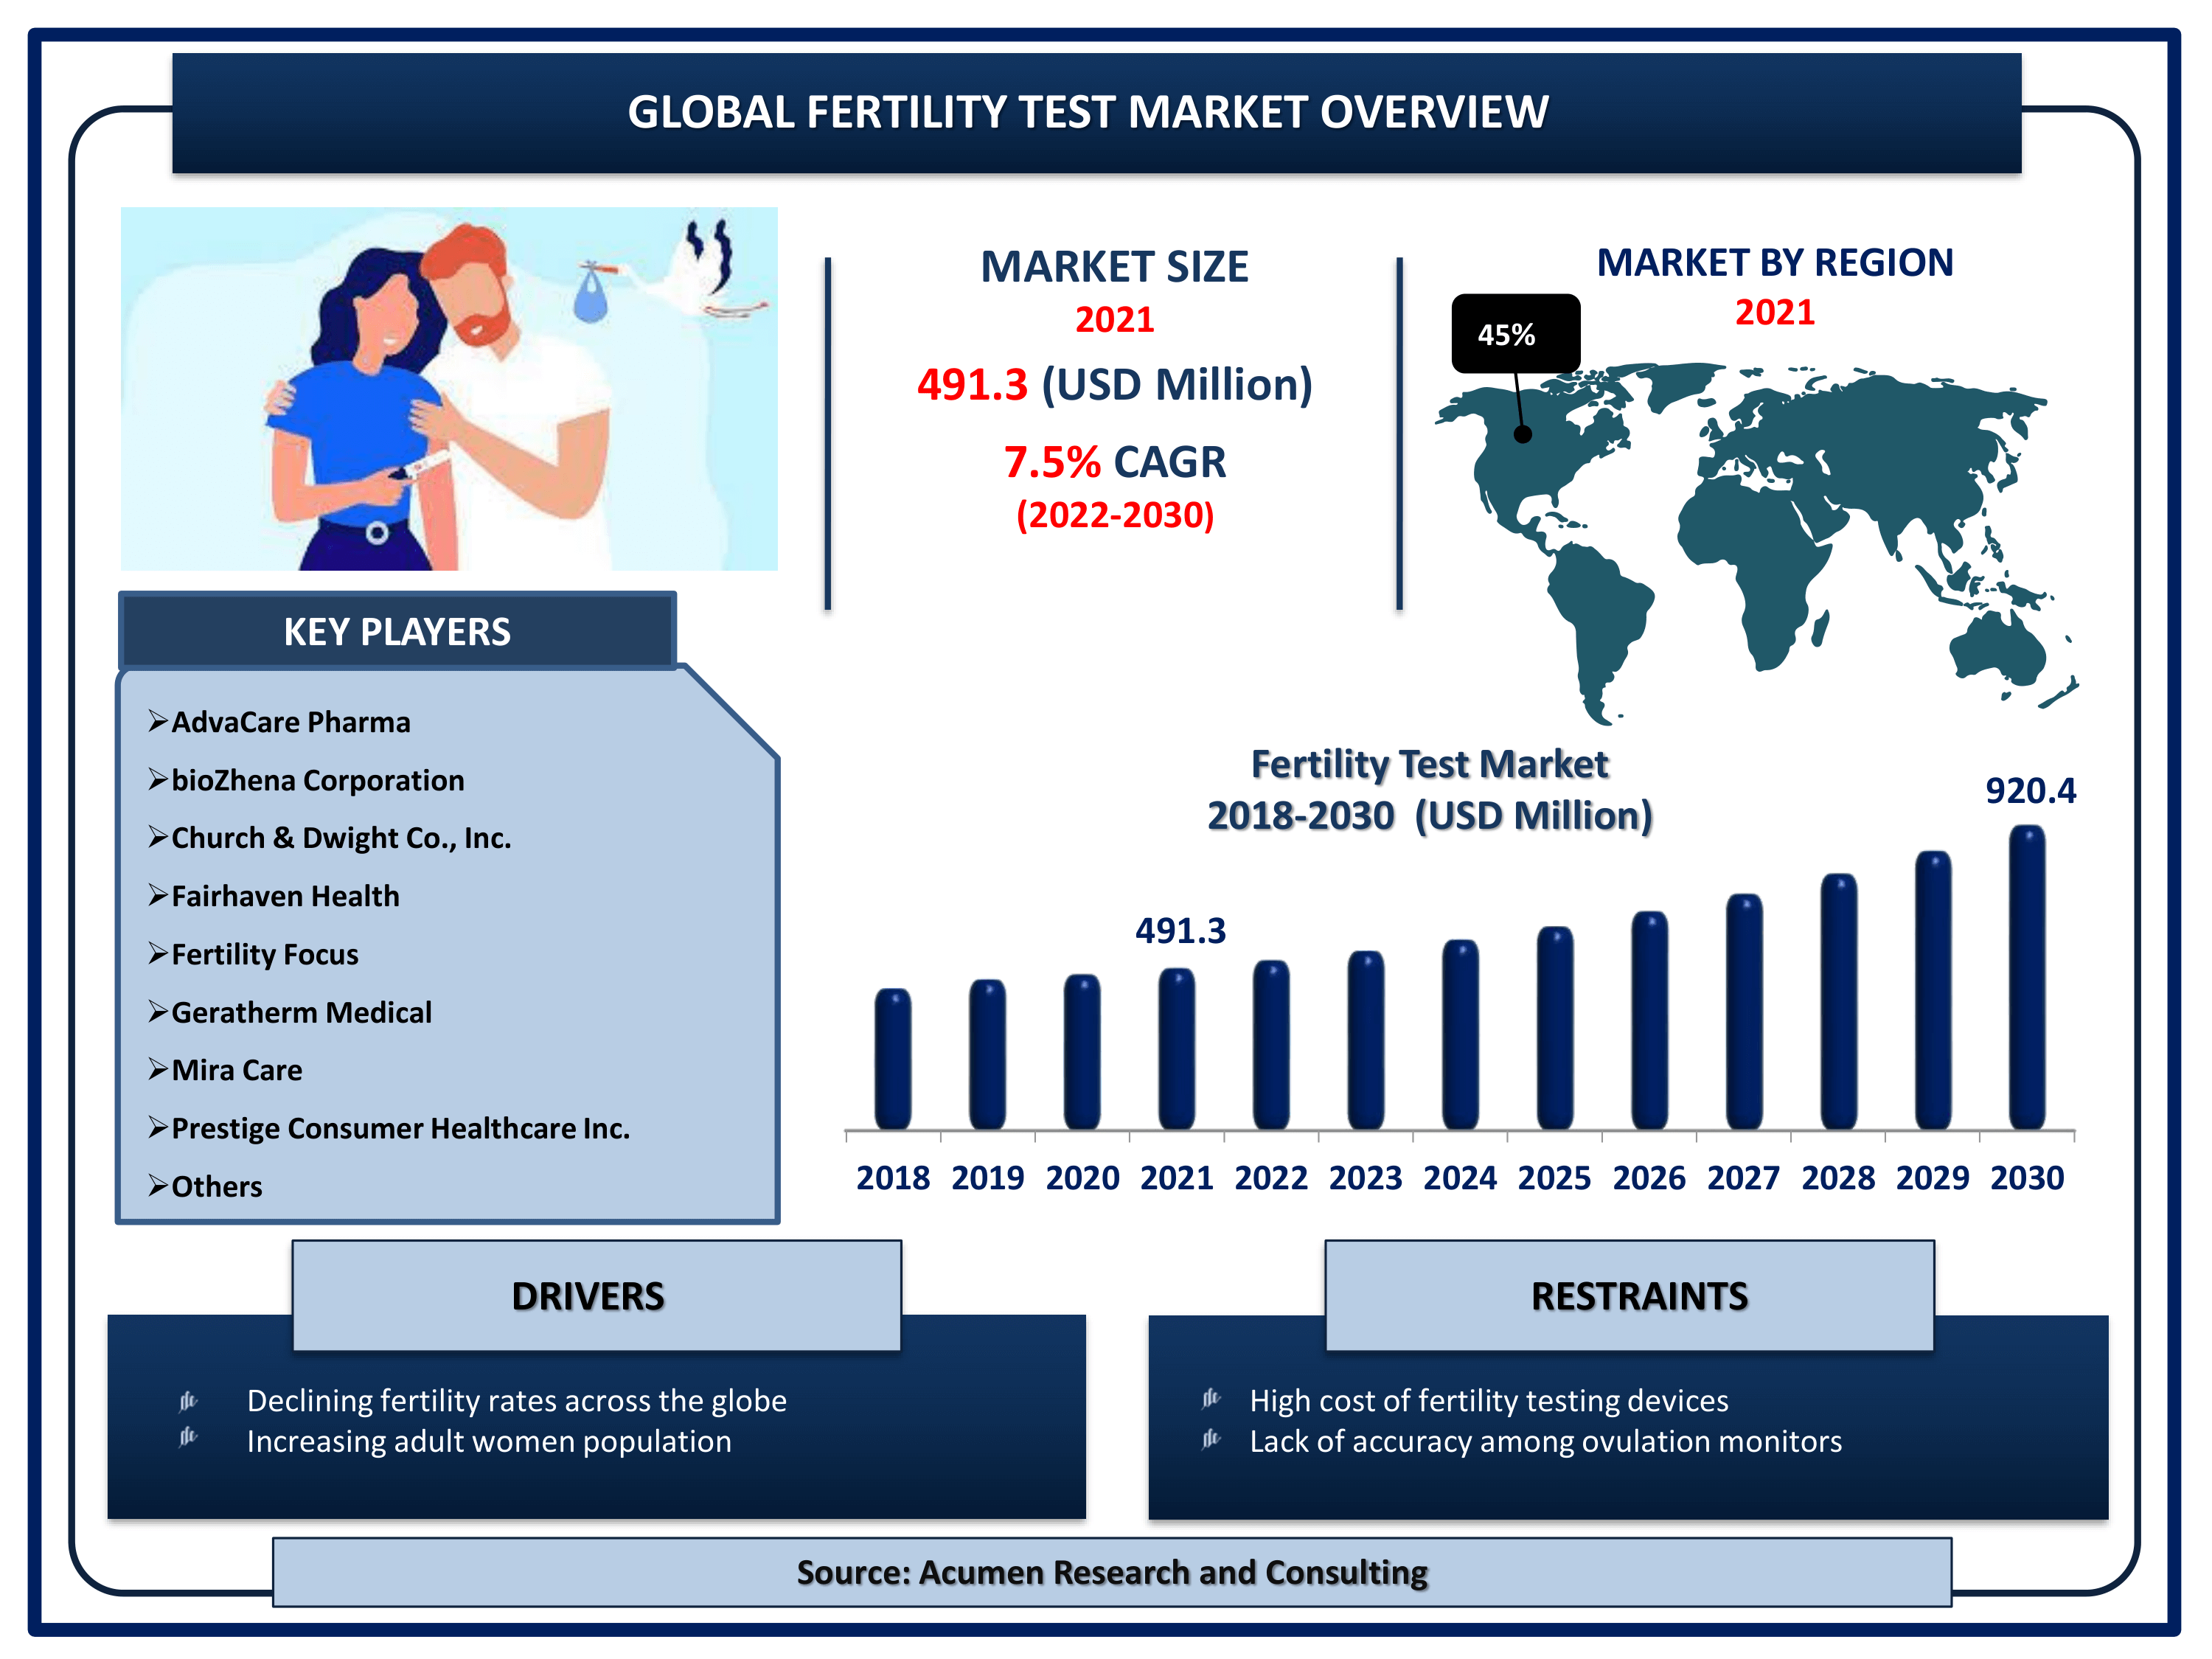 Global fertility test market revenue is estimated to reach USD 920.4 Million by 2030 with a CAGR of 7.5% from 2022 to 2030